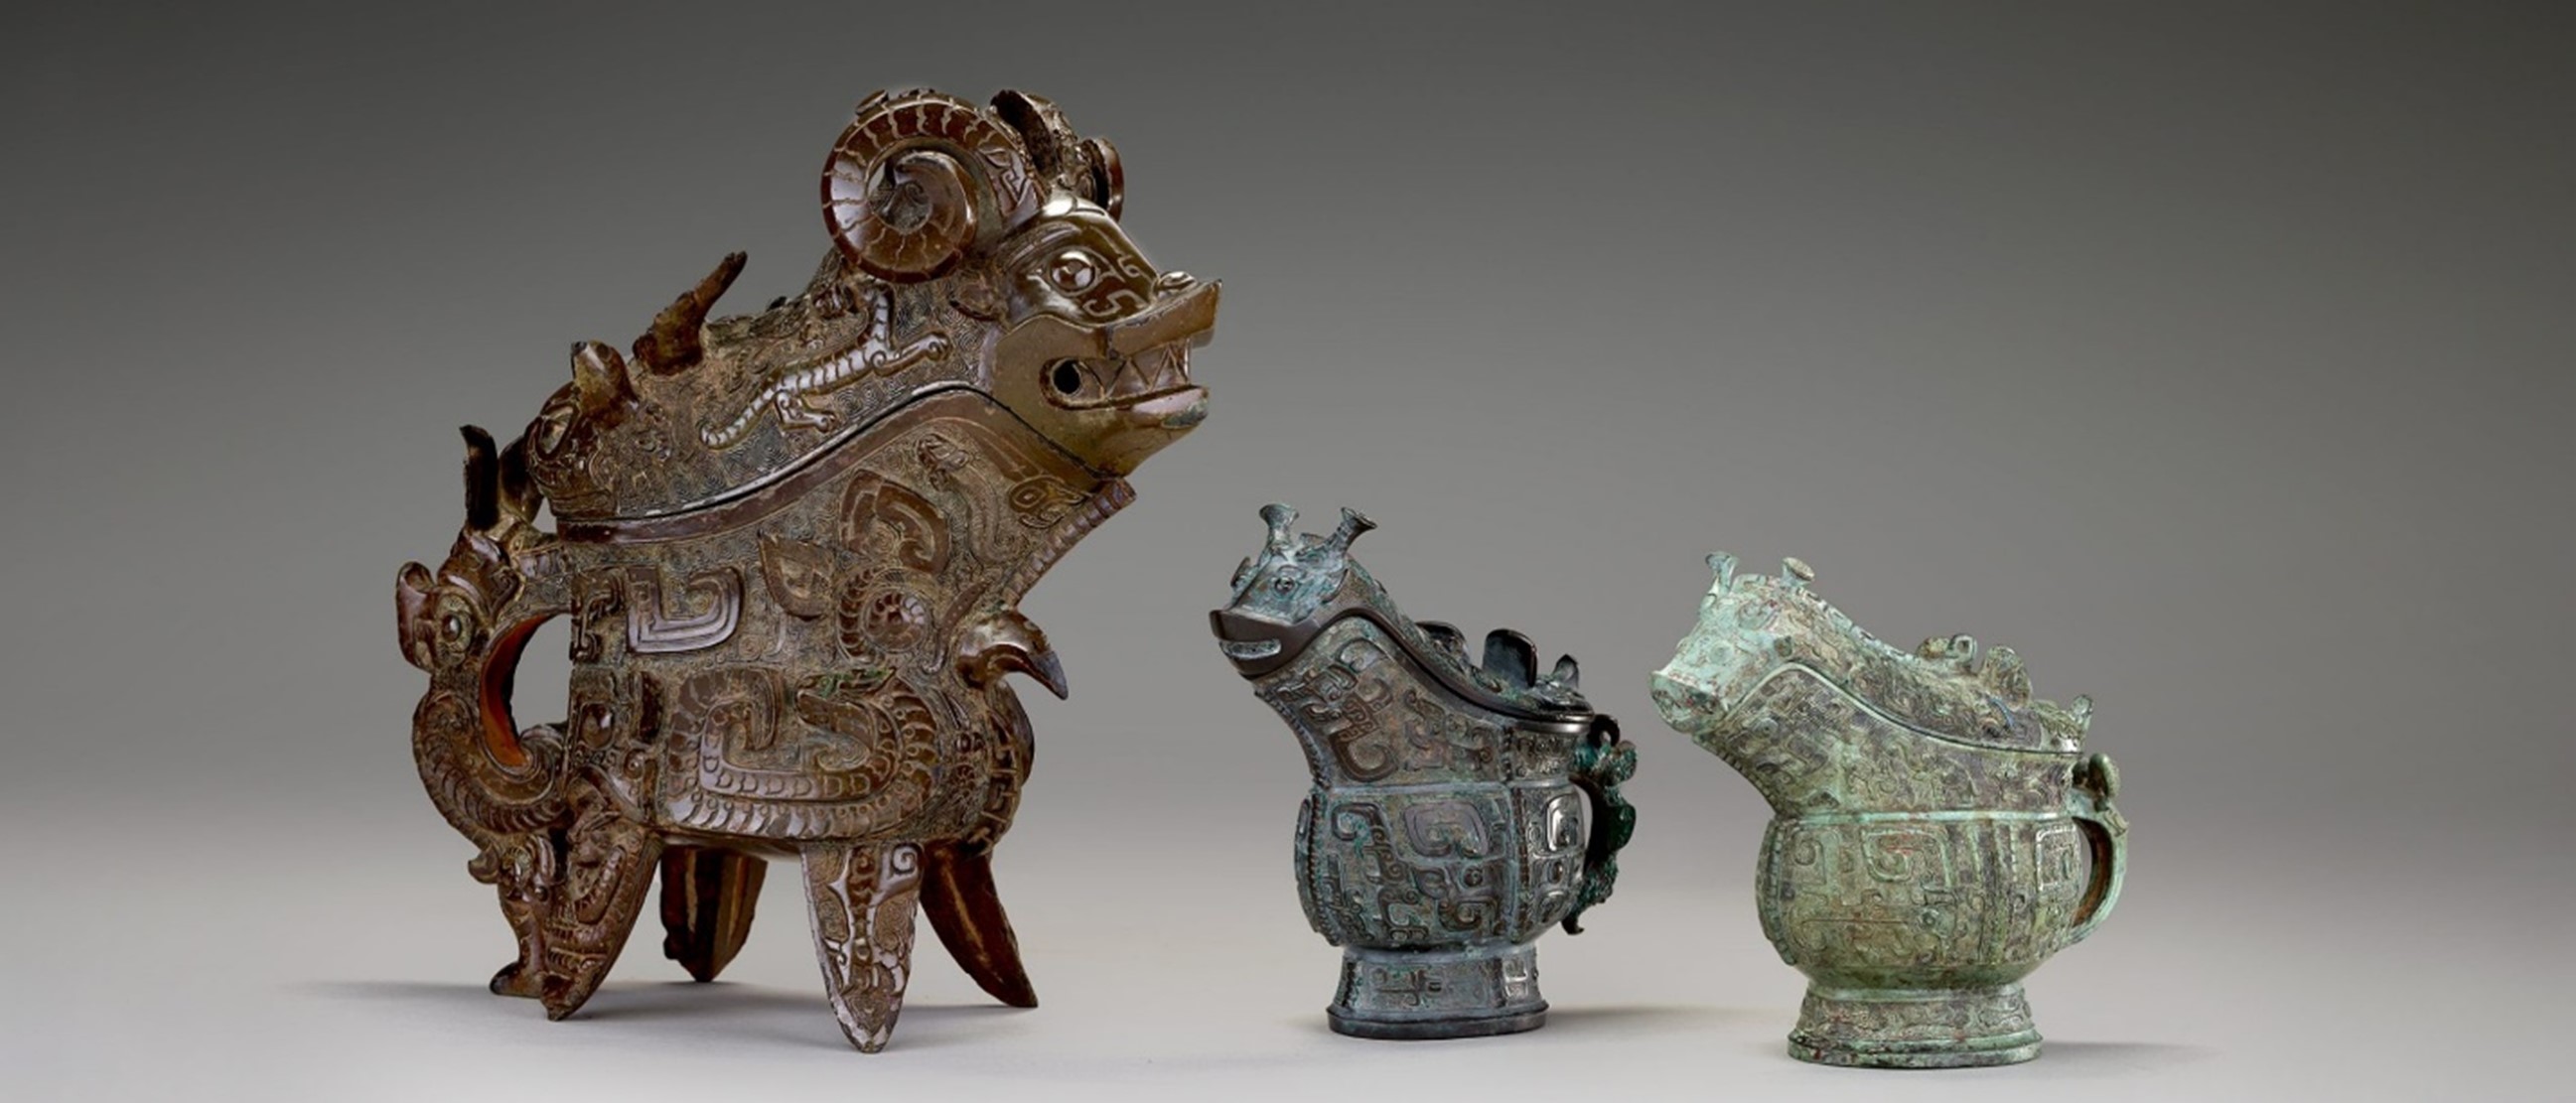 Three sculptural objects of varying ornateness depicting stylized animals